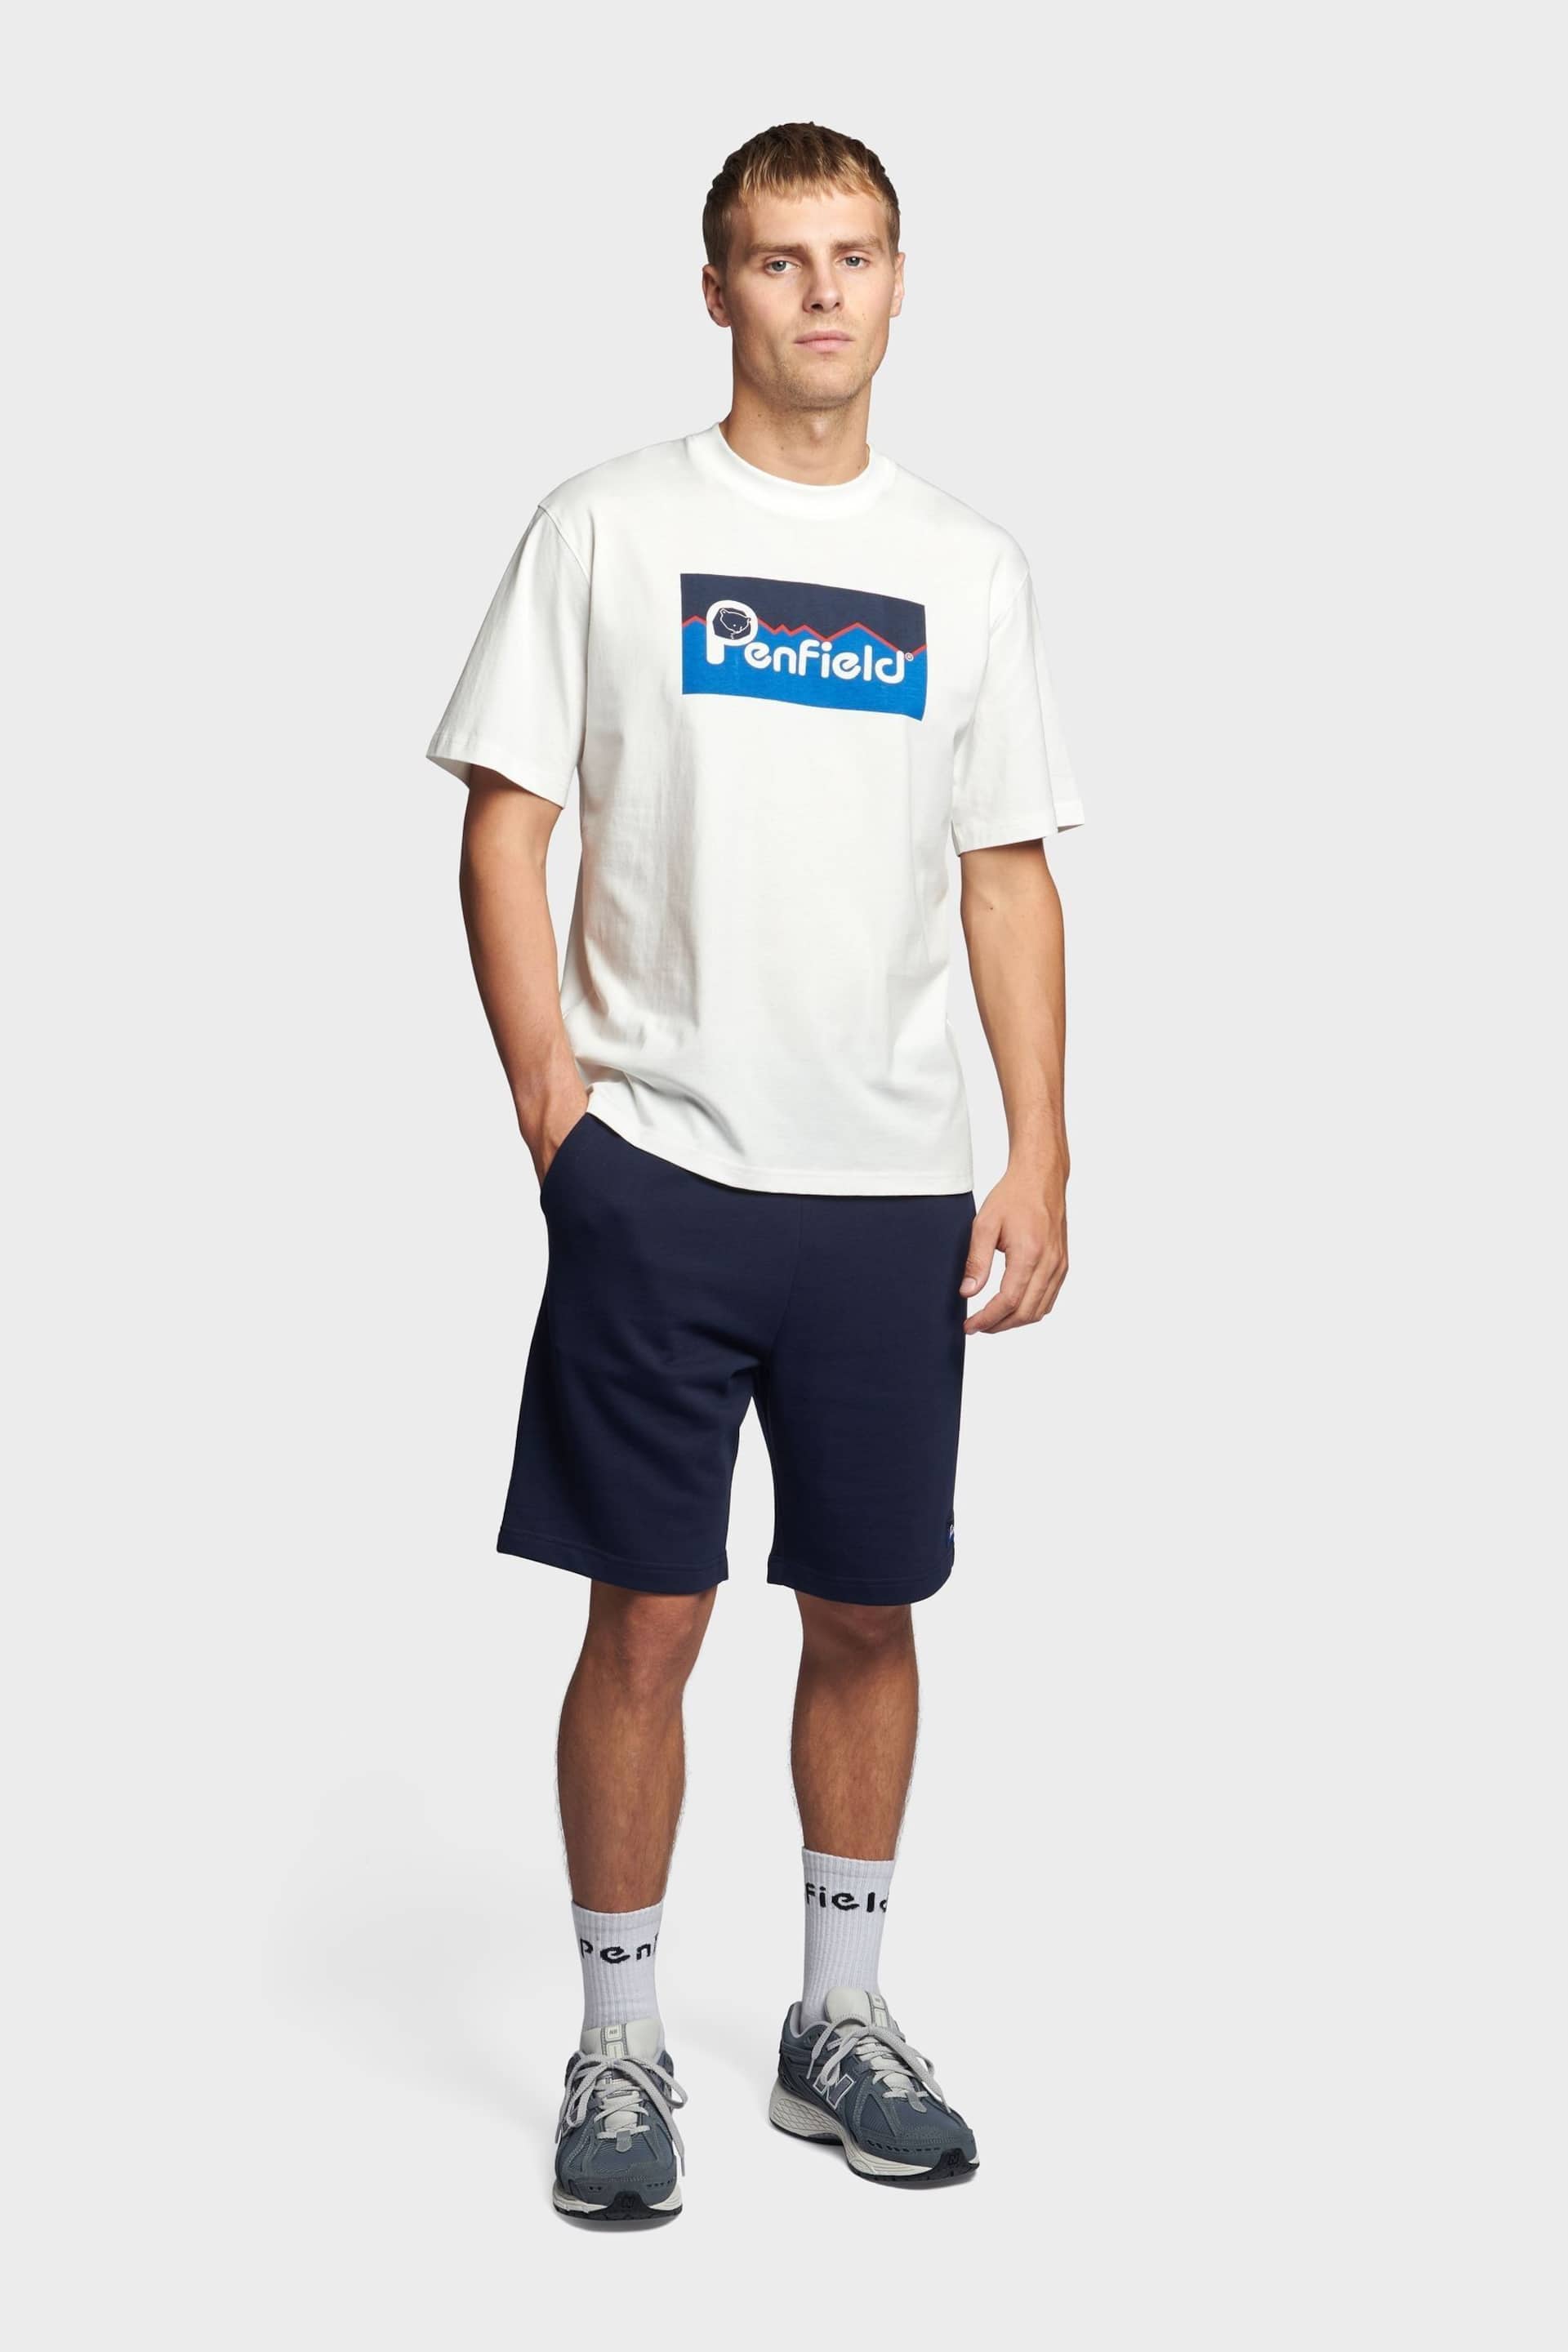 Penfield Mens Relaxed Fit Original Large Logo T-Shirt - Image 2 of 6